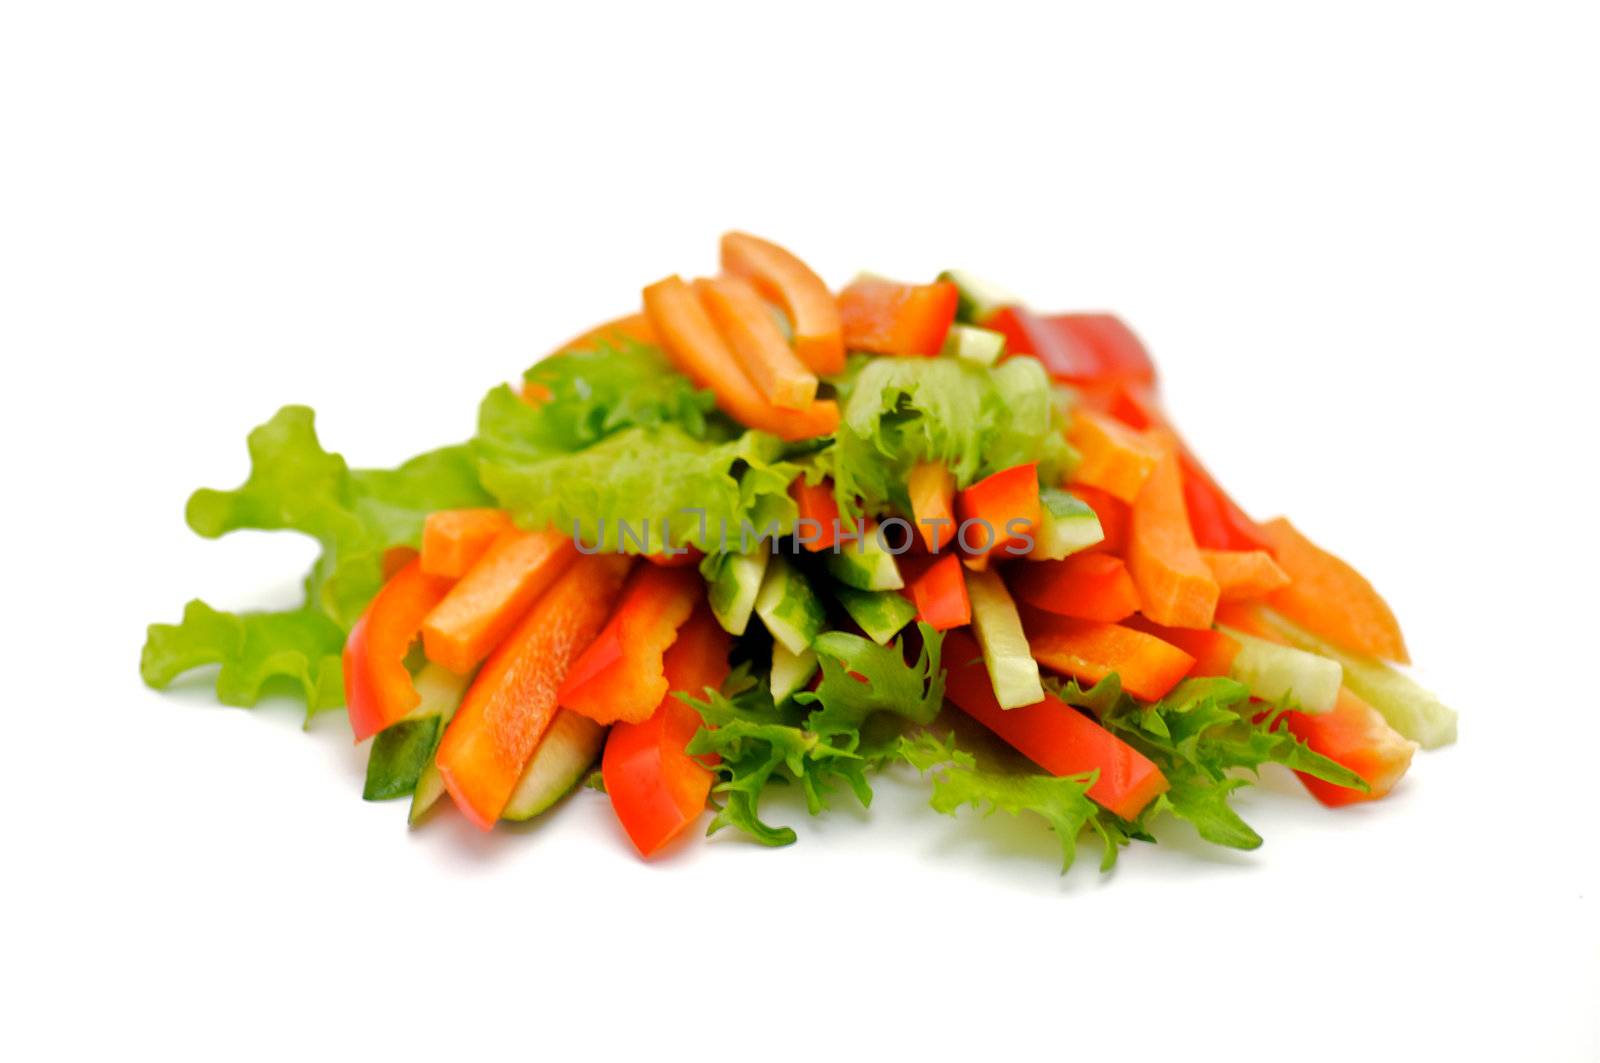 Red Bell pepper, cucumber and carrots straws with salad leaves isolated on white background